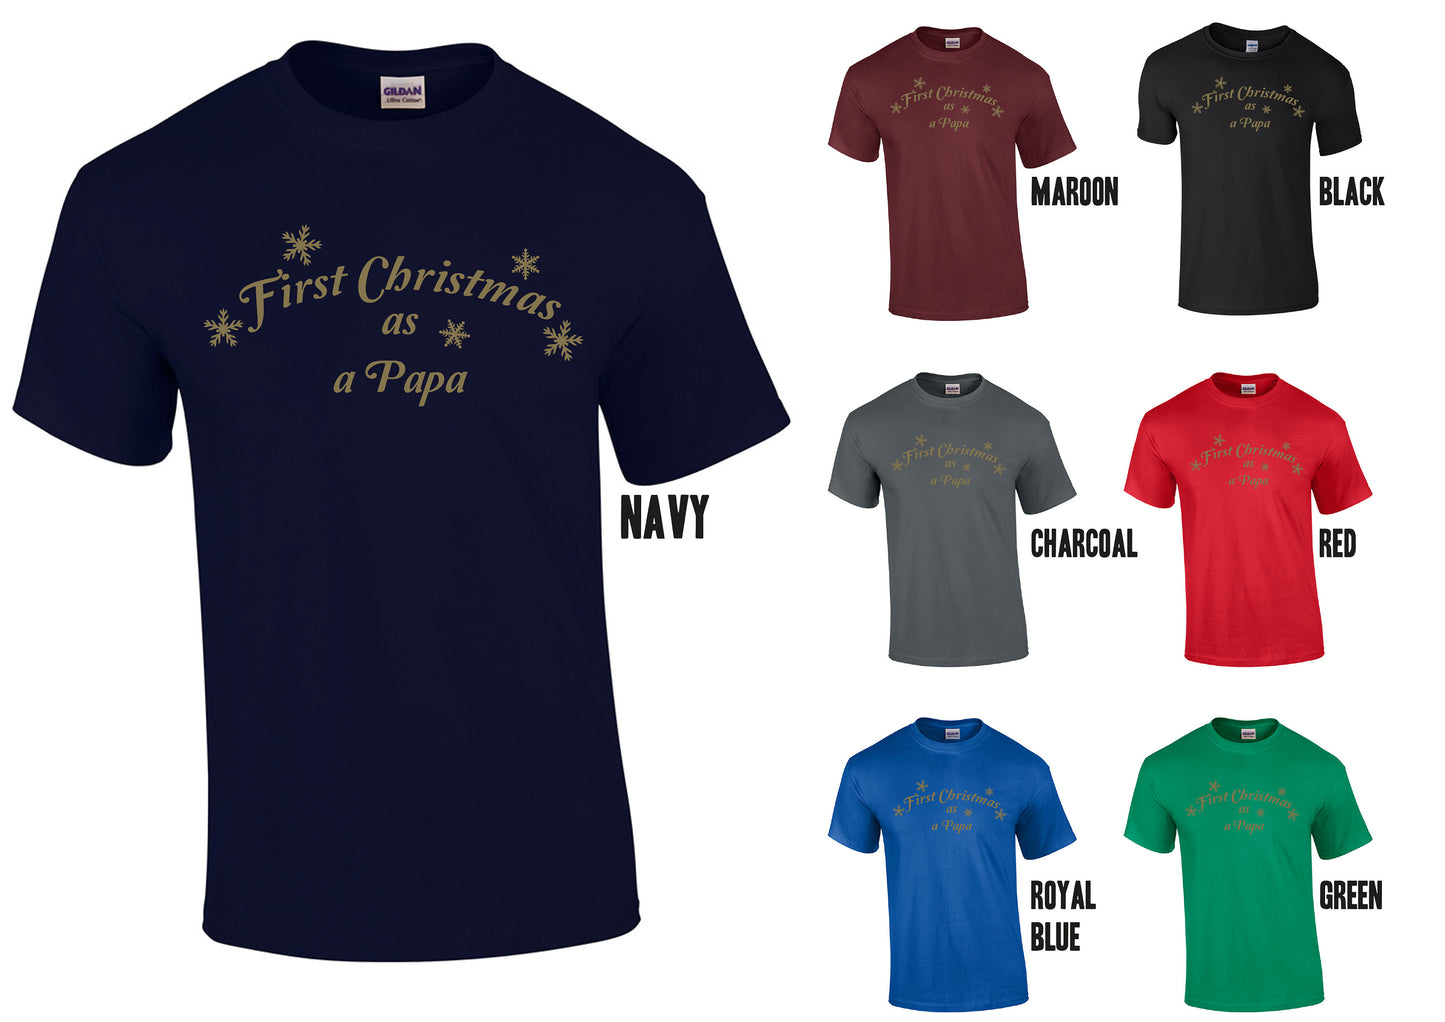 First Christmas as a Papa T-Shirt - Gold Print - Can be changed to Grandad or Grandpa or any other variation